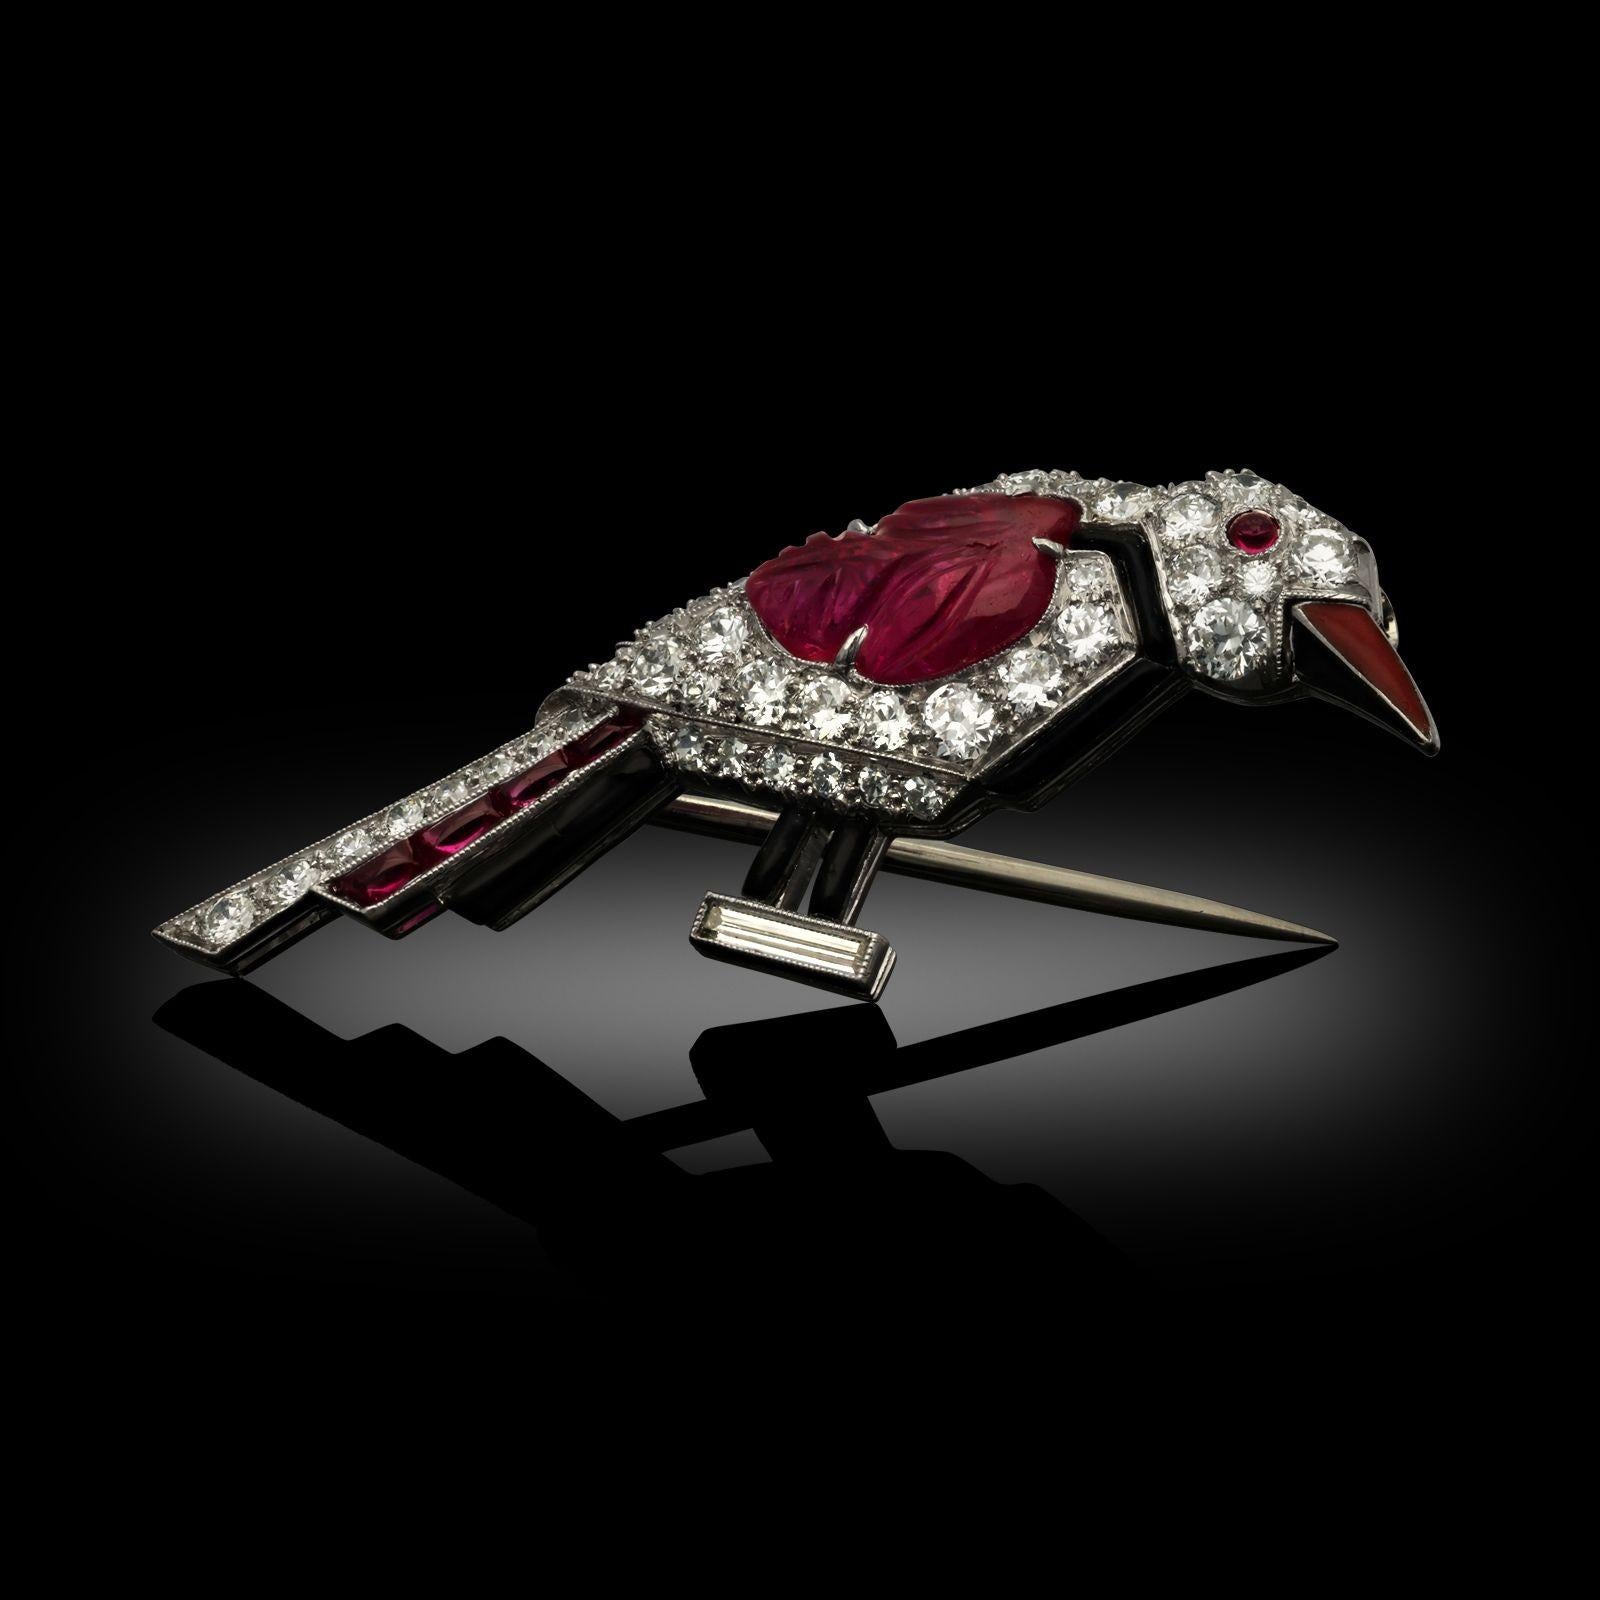 Oval Cut Cartier Art Deco Stylised Diamond And Carved Ruby Bird Brooch Circa 1925 London For Sale